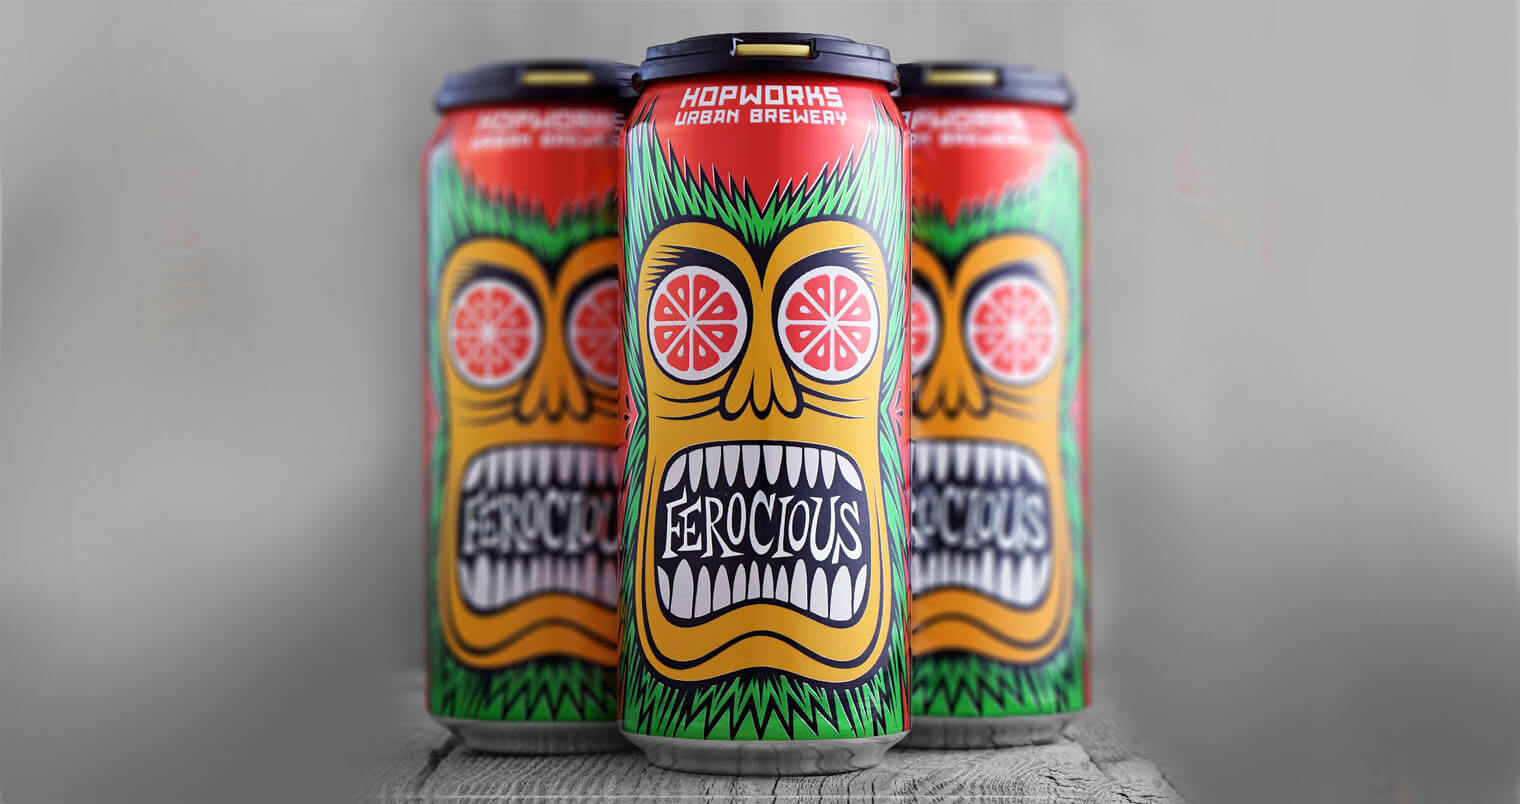 Hopworks Urban Brewery Ferocious Citrus Blood Orange IPA, cans on grey background, featured image